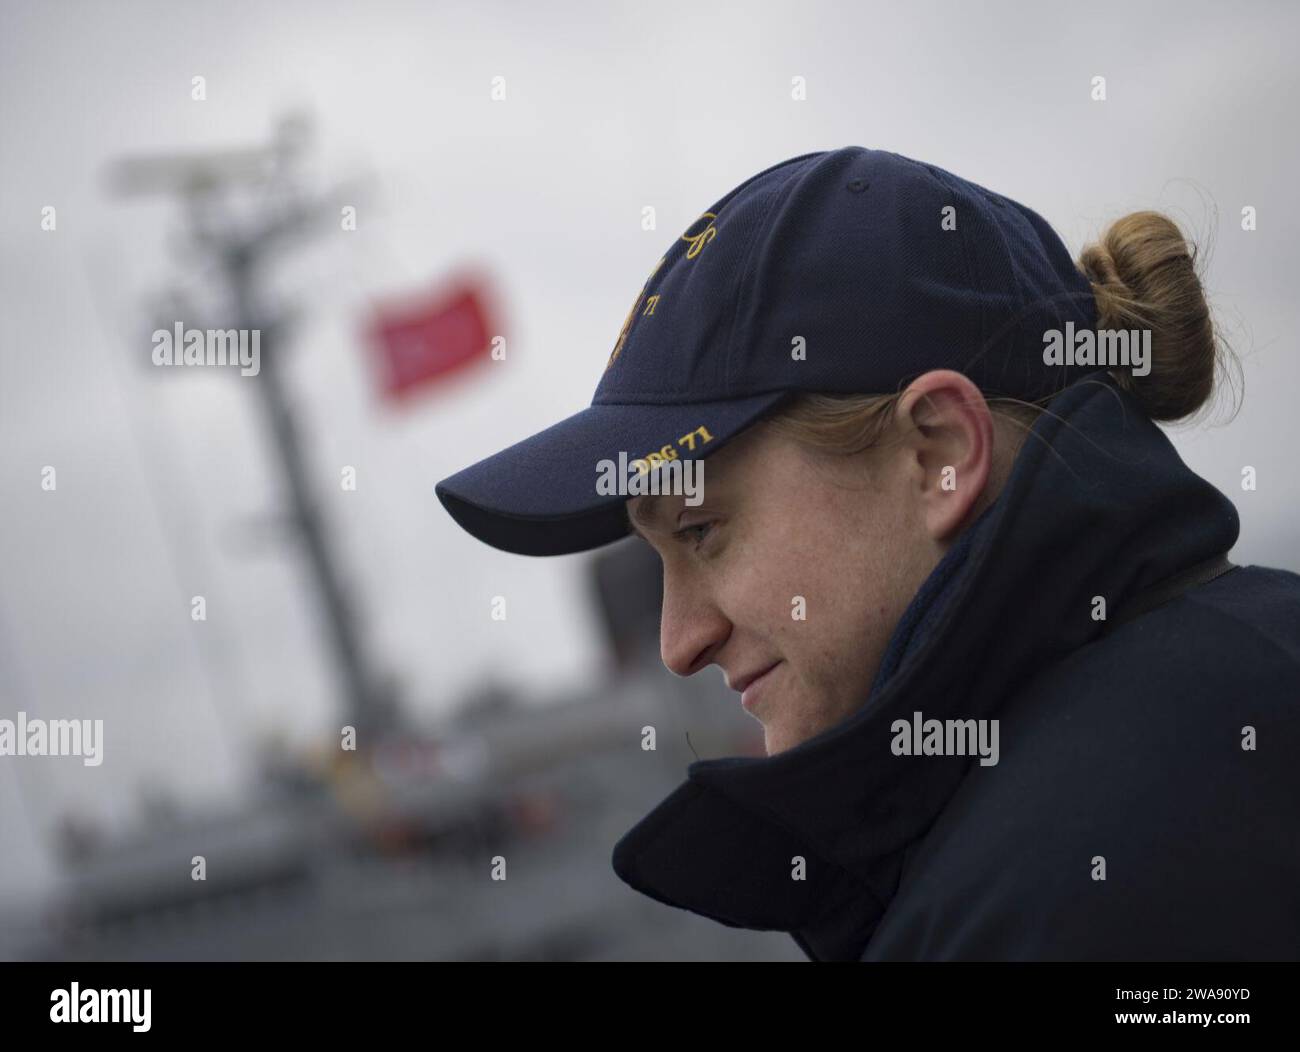 US military forces. 180217RG482-065 BLACK SEA (Feb. 17, 2018) Lt. Carleigh Gregory stands watch aboard the Arleigh Burke-class guided-missile destroyer USS Ross (DDG 71) during a refueling-at-sea with the Turkish Akar-class replenishment oiler TCG Yuzbasi Kudret Gungor (A 595) Feb. 17, 2018 in the Black Sea. Ross, forward-deployed to Rota, Spain, is on its sixth patrol in the U.S. 6th Fleet area of operations in support of regional allies and partners and U.S. national security interests in Europe. (U.S. Navy photo by Mass Communication Specialist 1st Class Kyle Steckler/Released) Stock Photo